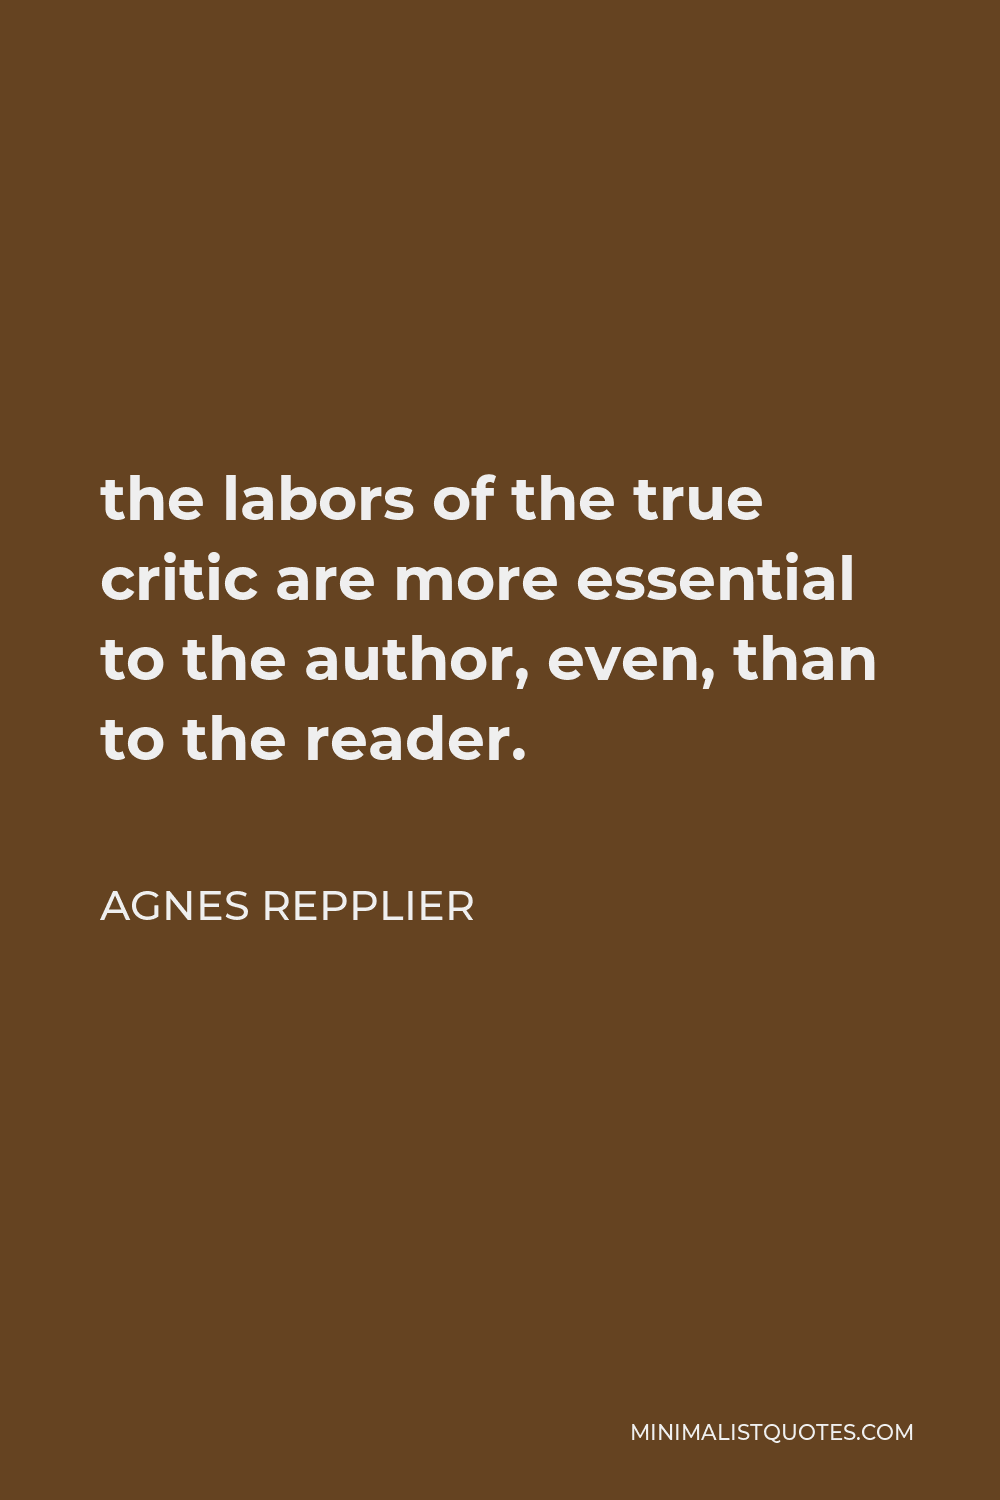 Agnes Repplier Quote - the labors of the true critic are more essential to the author, even, than to the reader.